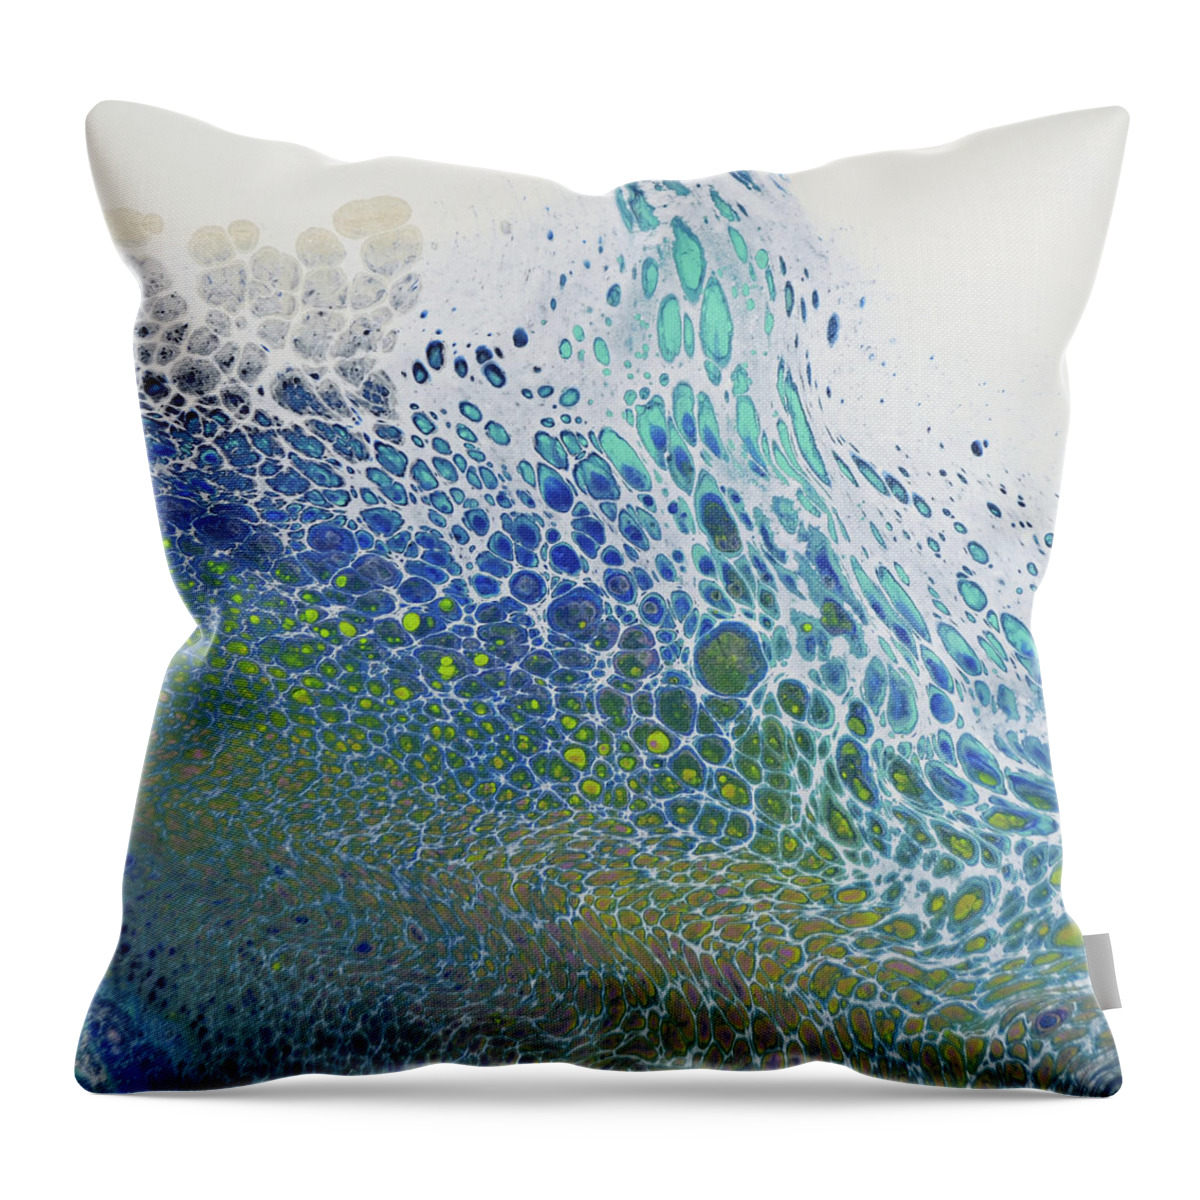 Coastal Throw Pillow featuring the painting Along the Wish Filled Shore by Joanne Grant